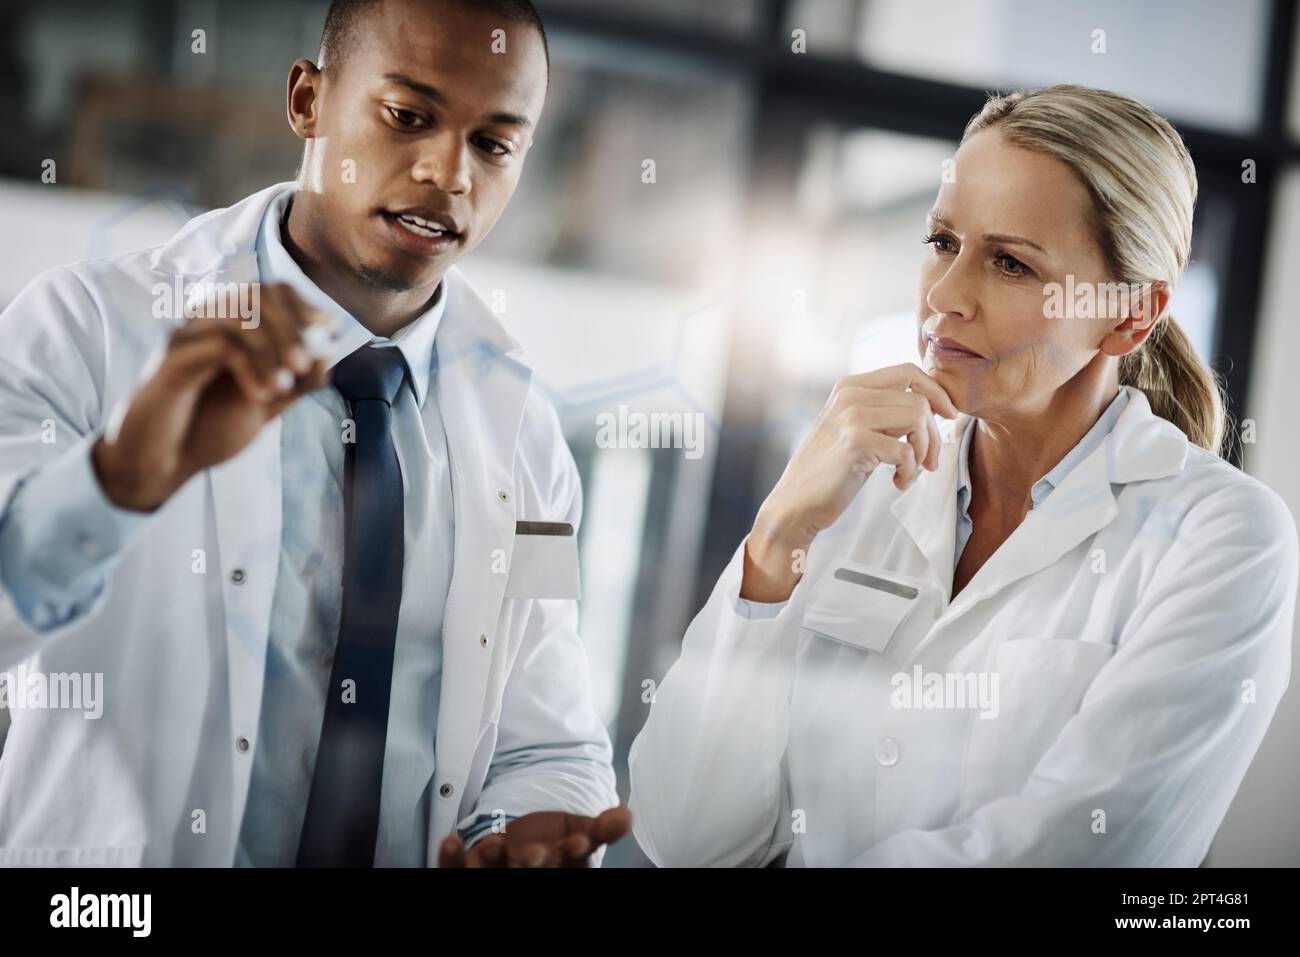 Its all in the formula. two scientists writing down formulas on a glass wipe board while doing research in their lab Stock Photo